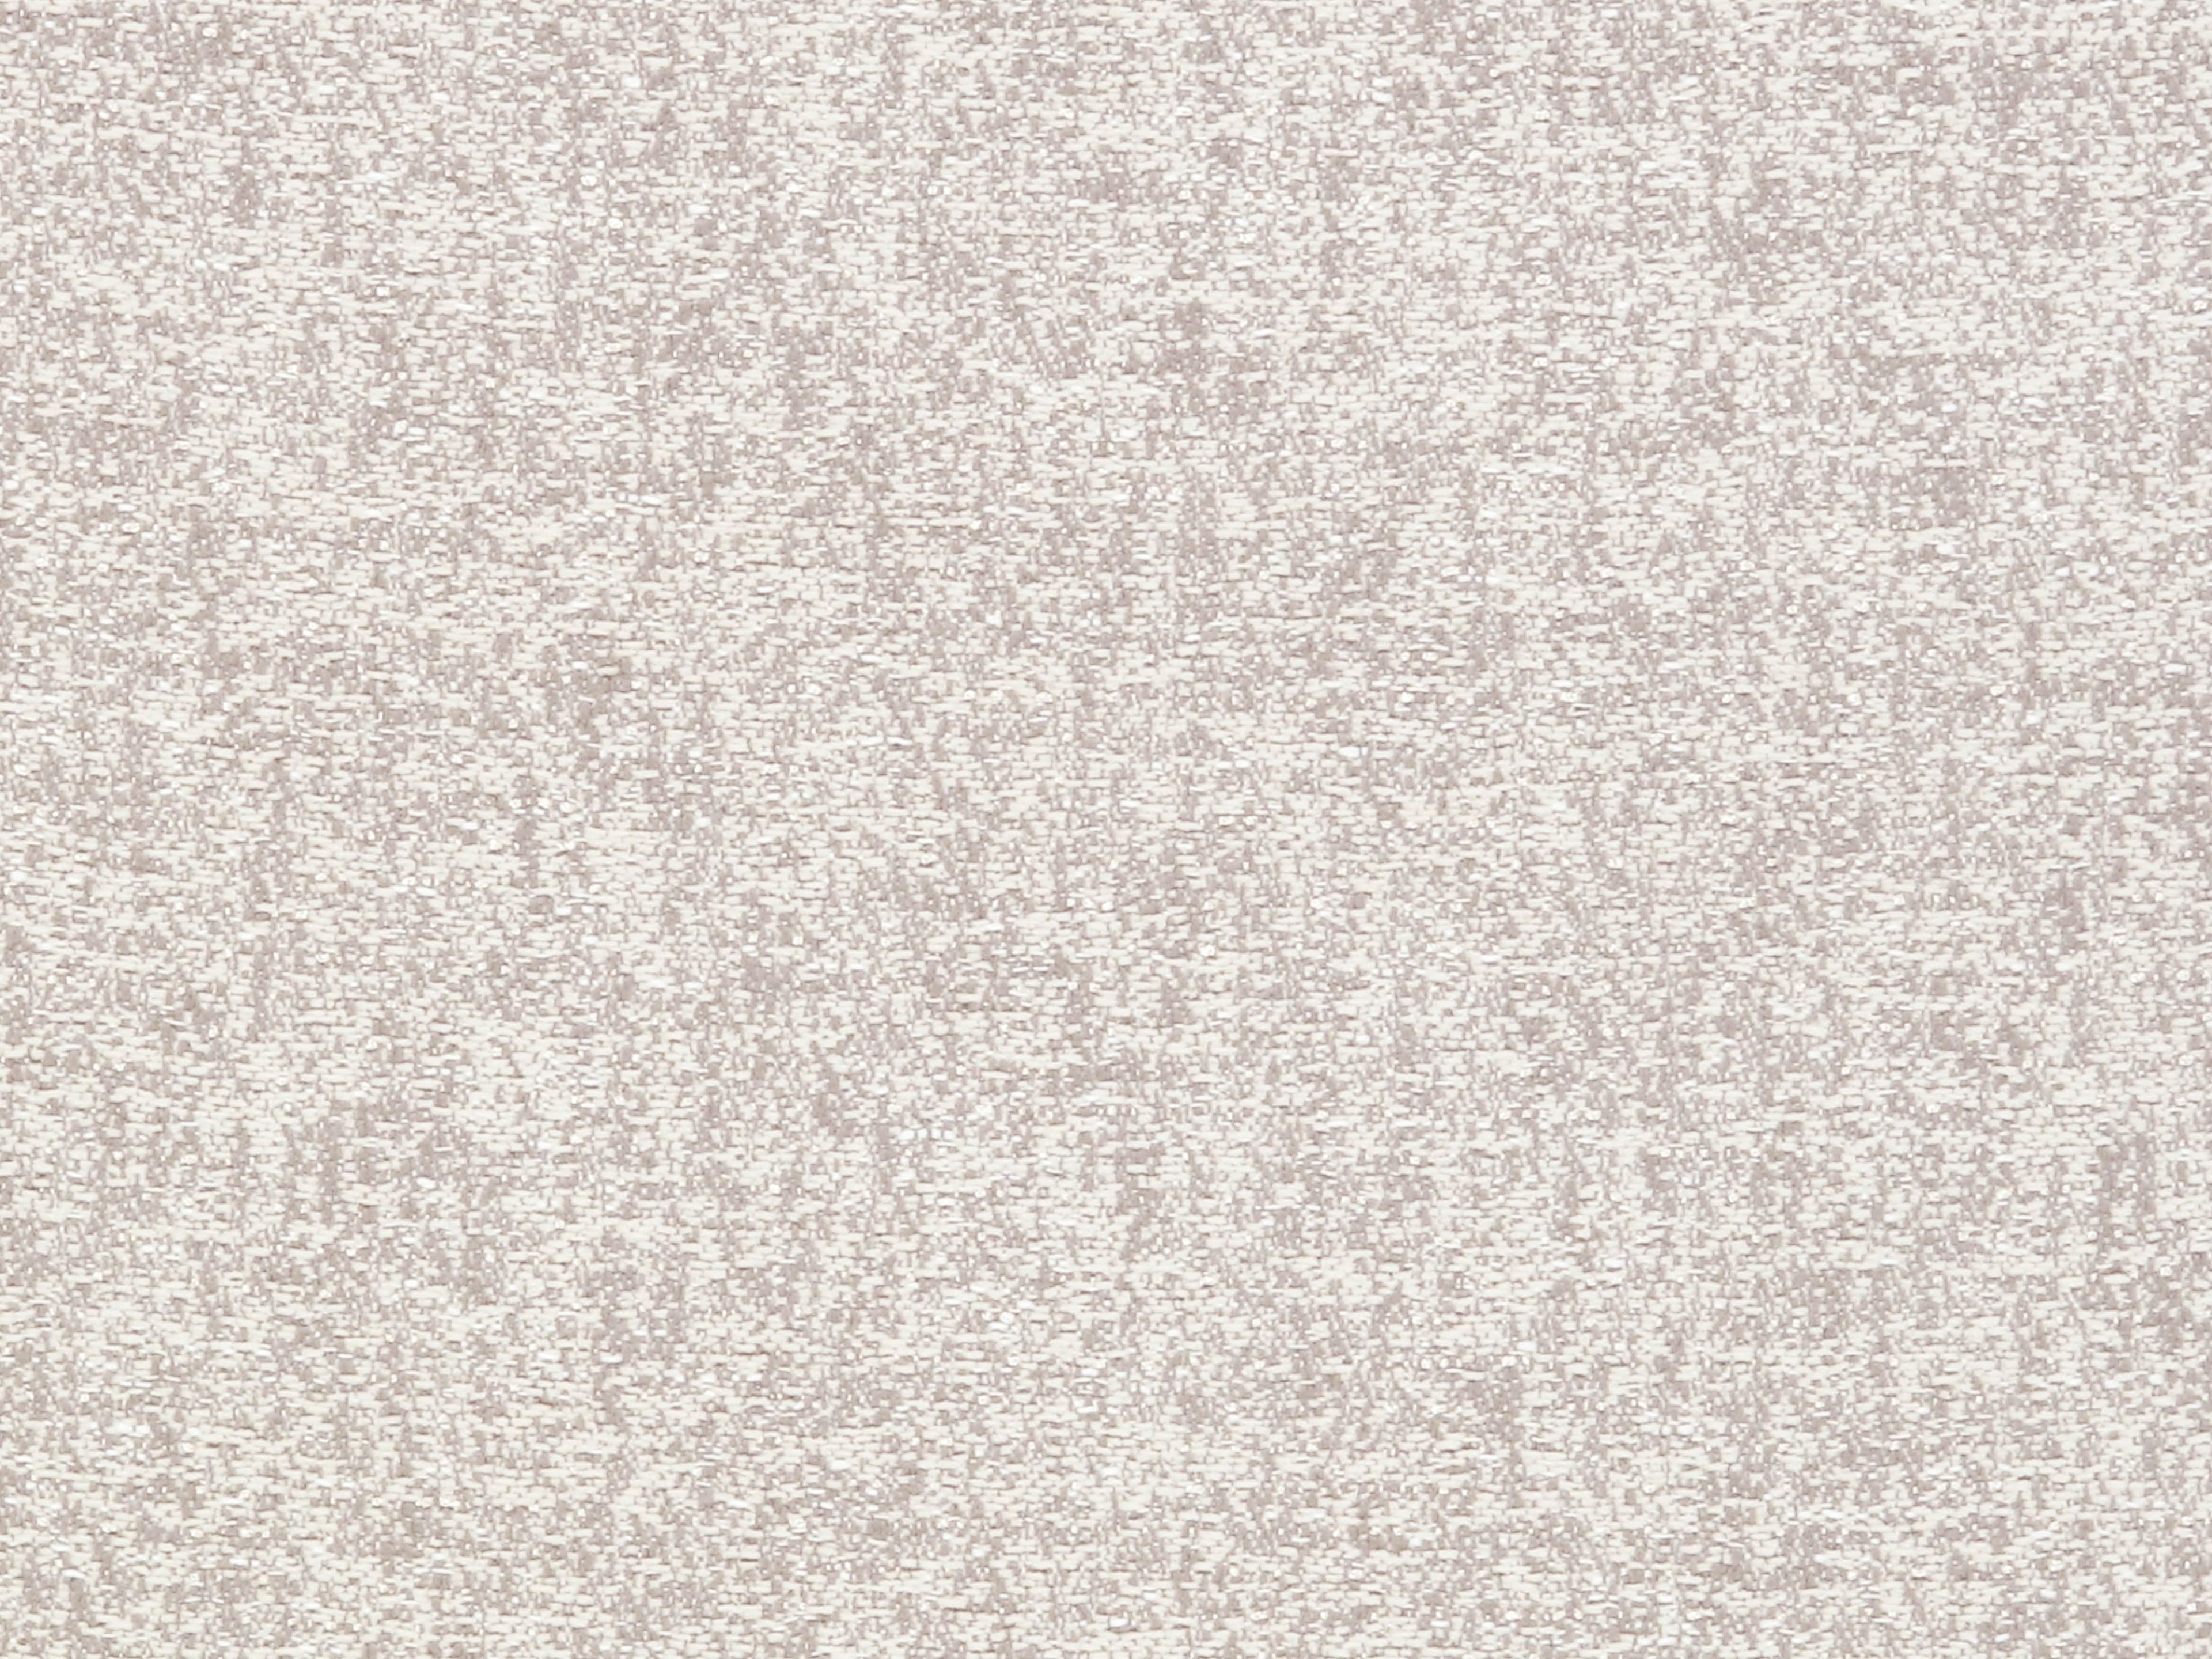 Belle Neige fabric in birch color - pattern number EY 0027D012 - by Scalamandre in the Old World Weavers collection